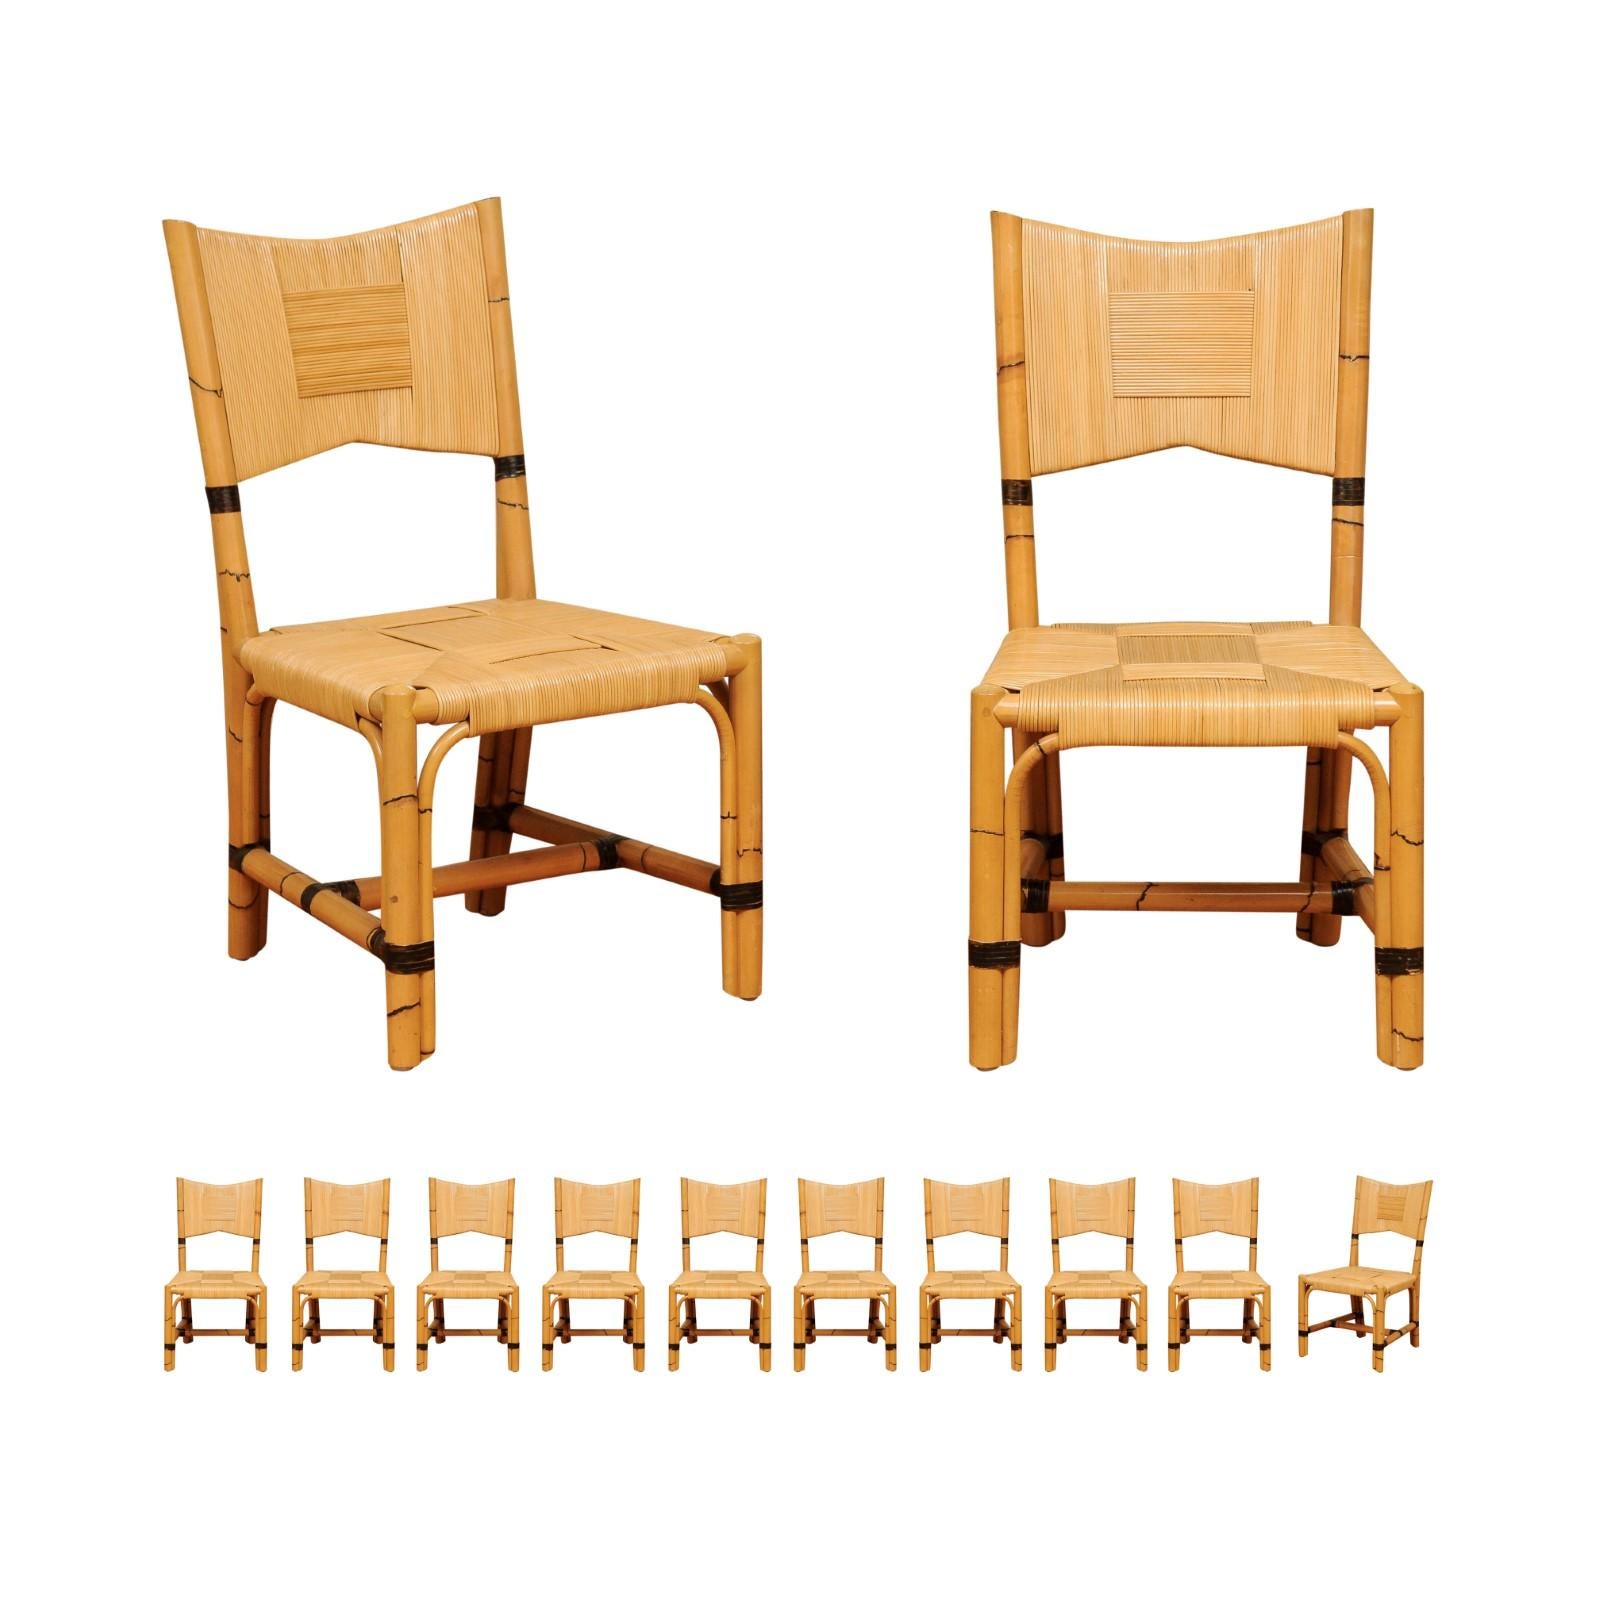 This magnificent set of dining chairs is Unique on the World market. The set is shipped as professionally photographed and described in the listing narrative: Meticulously professionally restored and completely installation ready. Expert custom